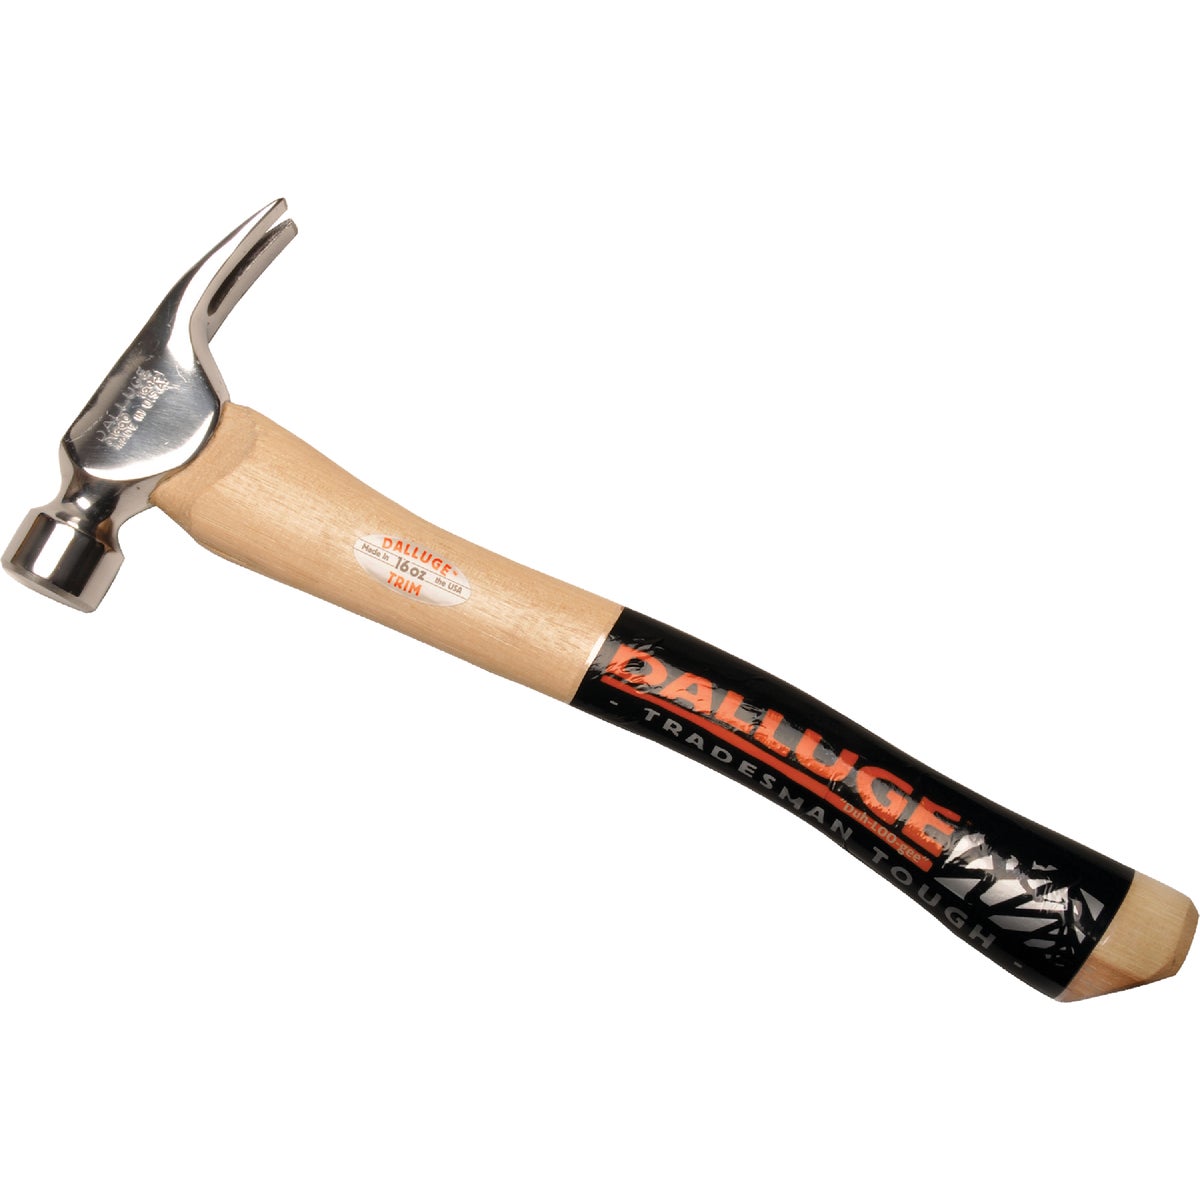 Item 343137, Finishing hammer is of compact design and lighter weight making it ideal 